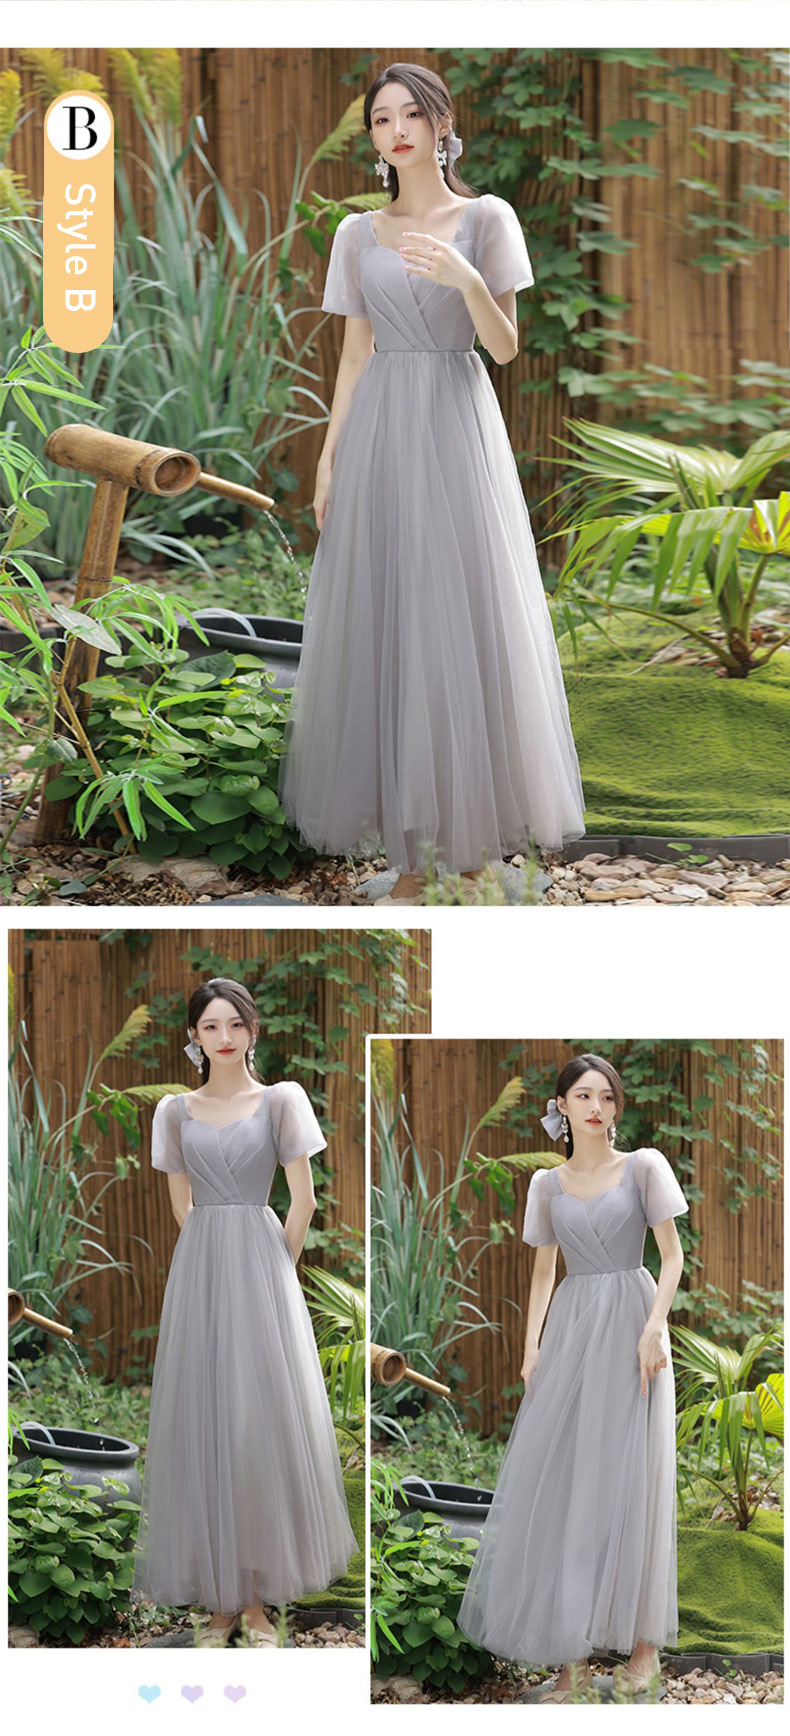 Womens-Casual-Party-Wedding-Guest-Bridesmaid-Maxi-Dress-Gown17.jpg